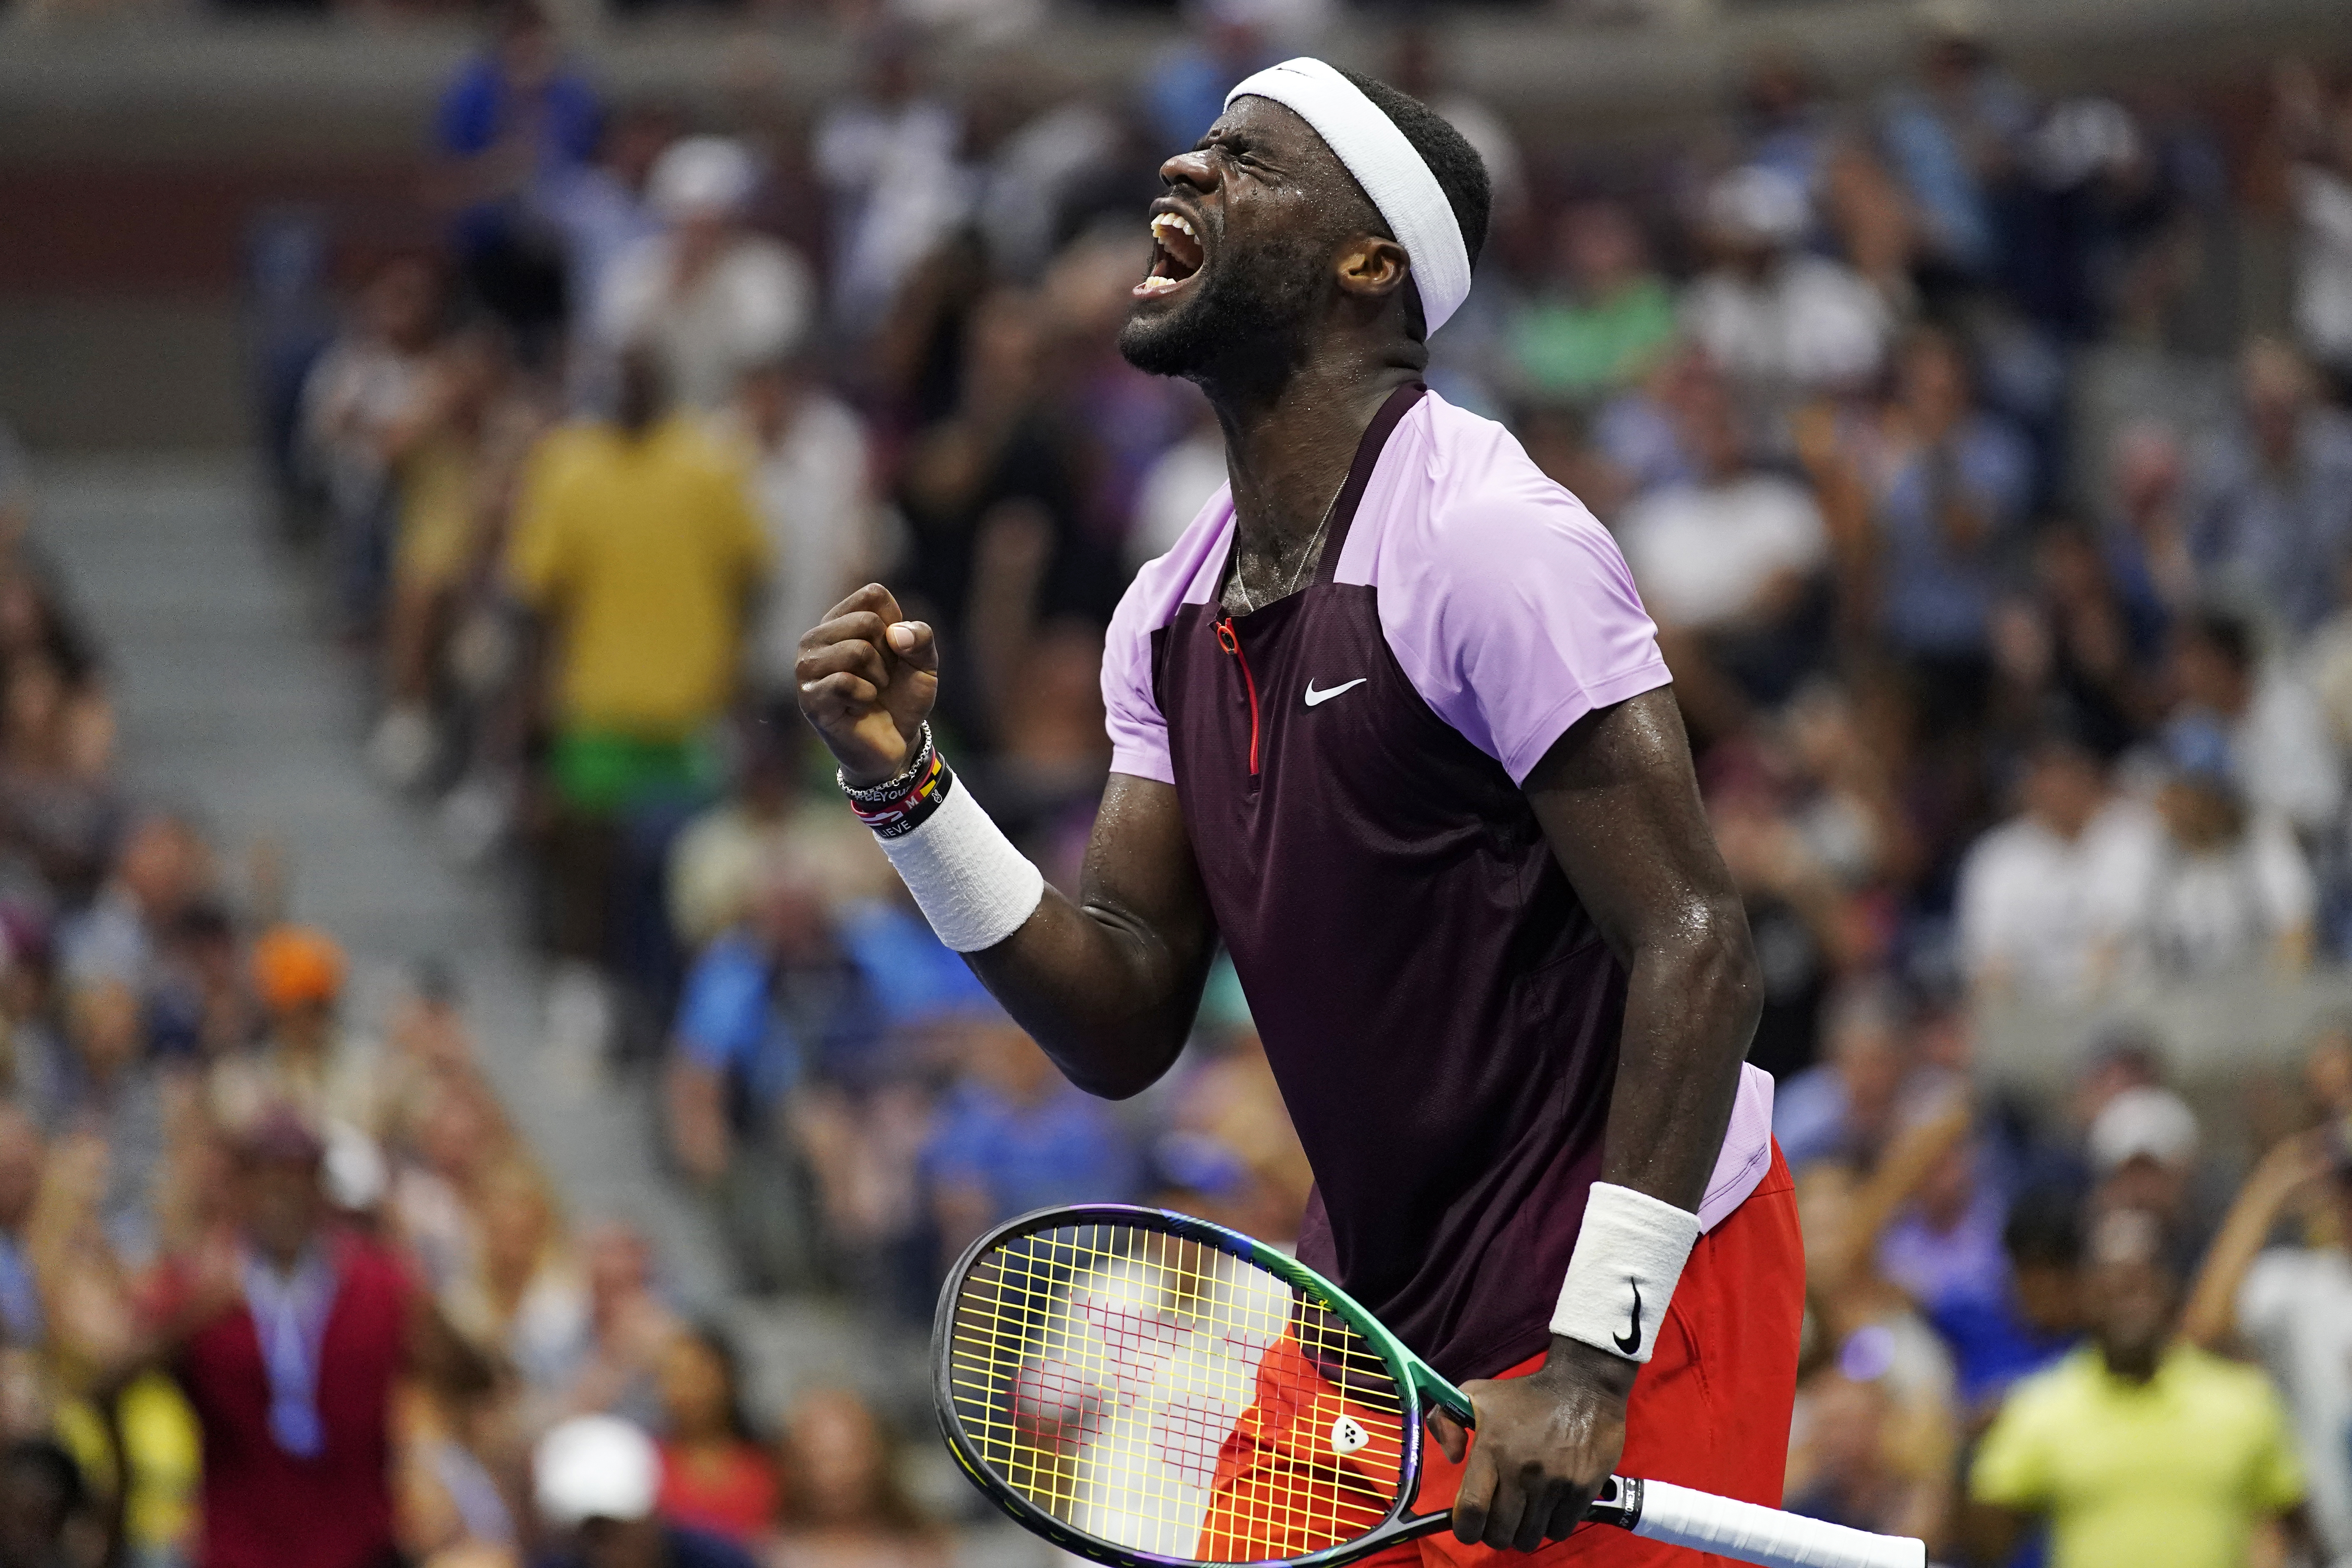 How to watch Frances Tiafoe at U.S